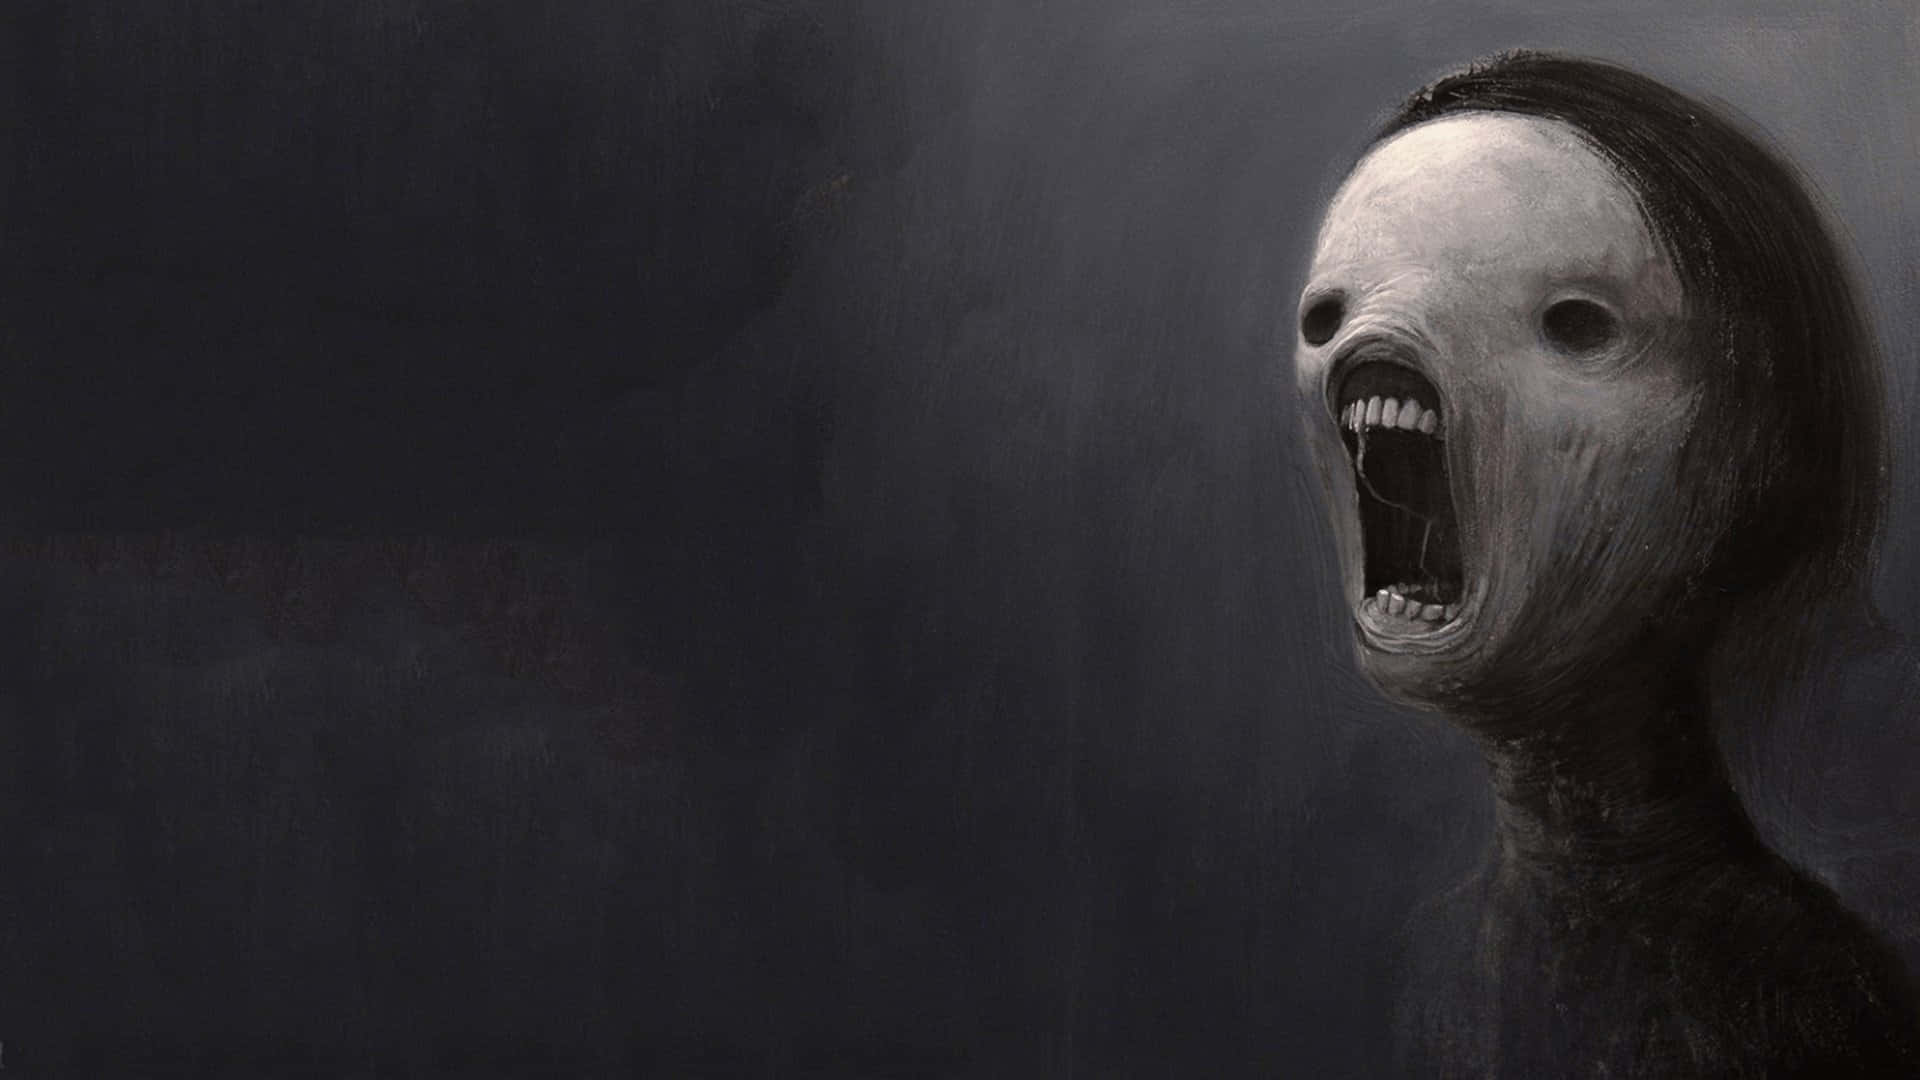 A Painting Of A Scary Face With A Mouth Open